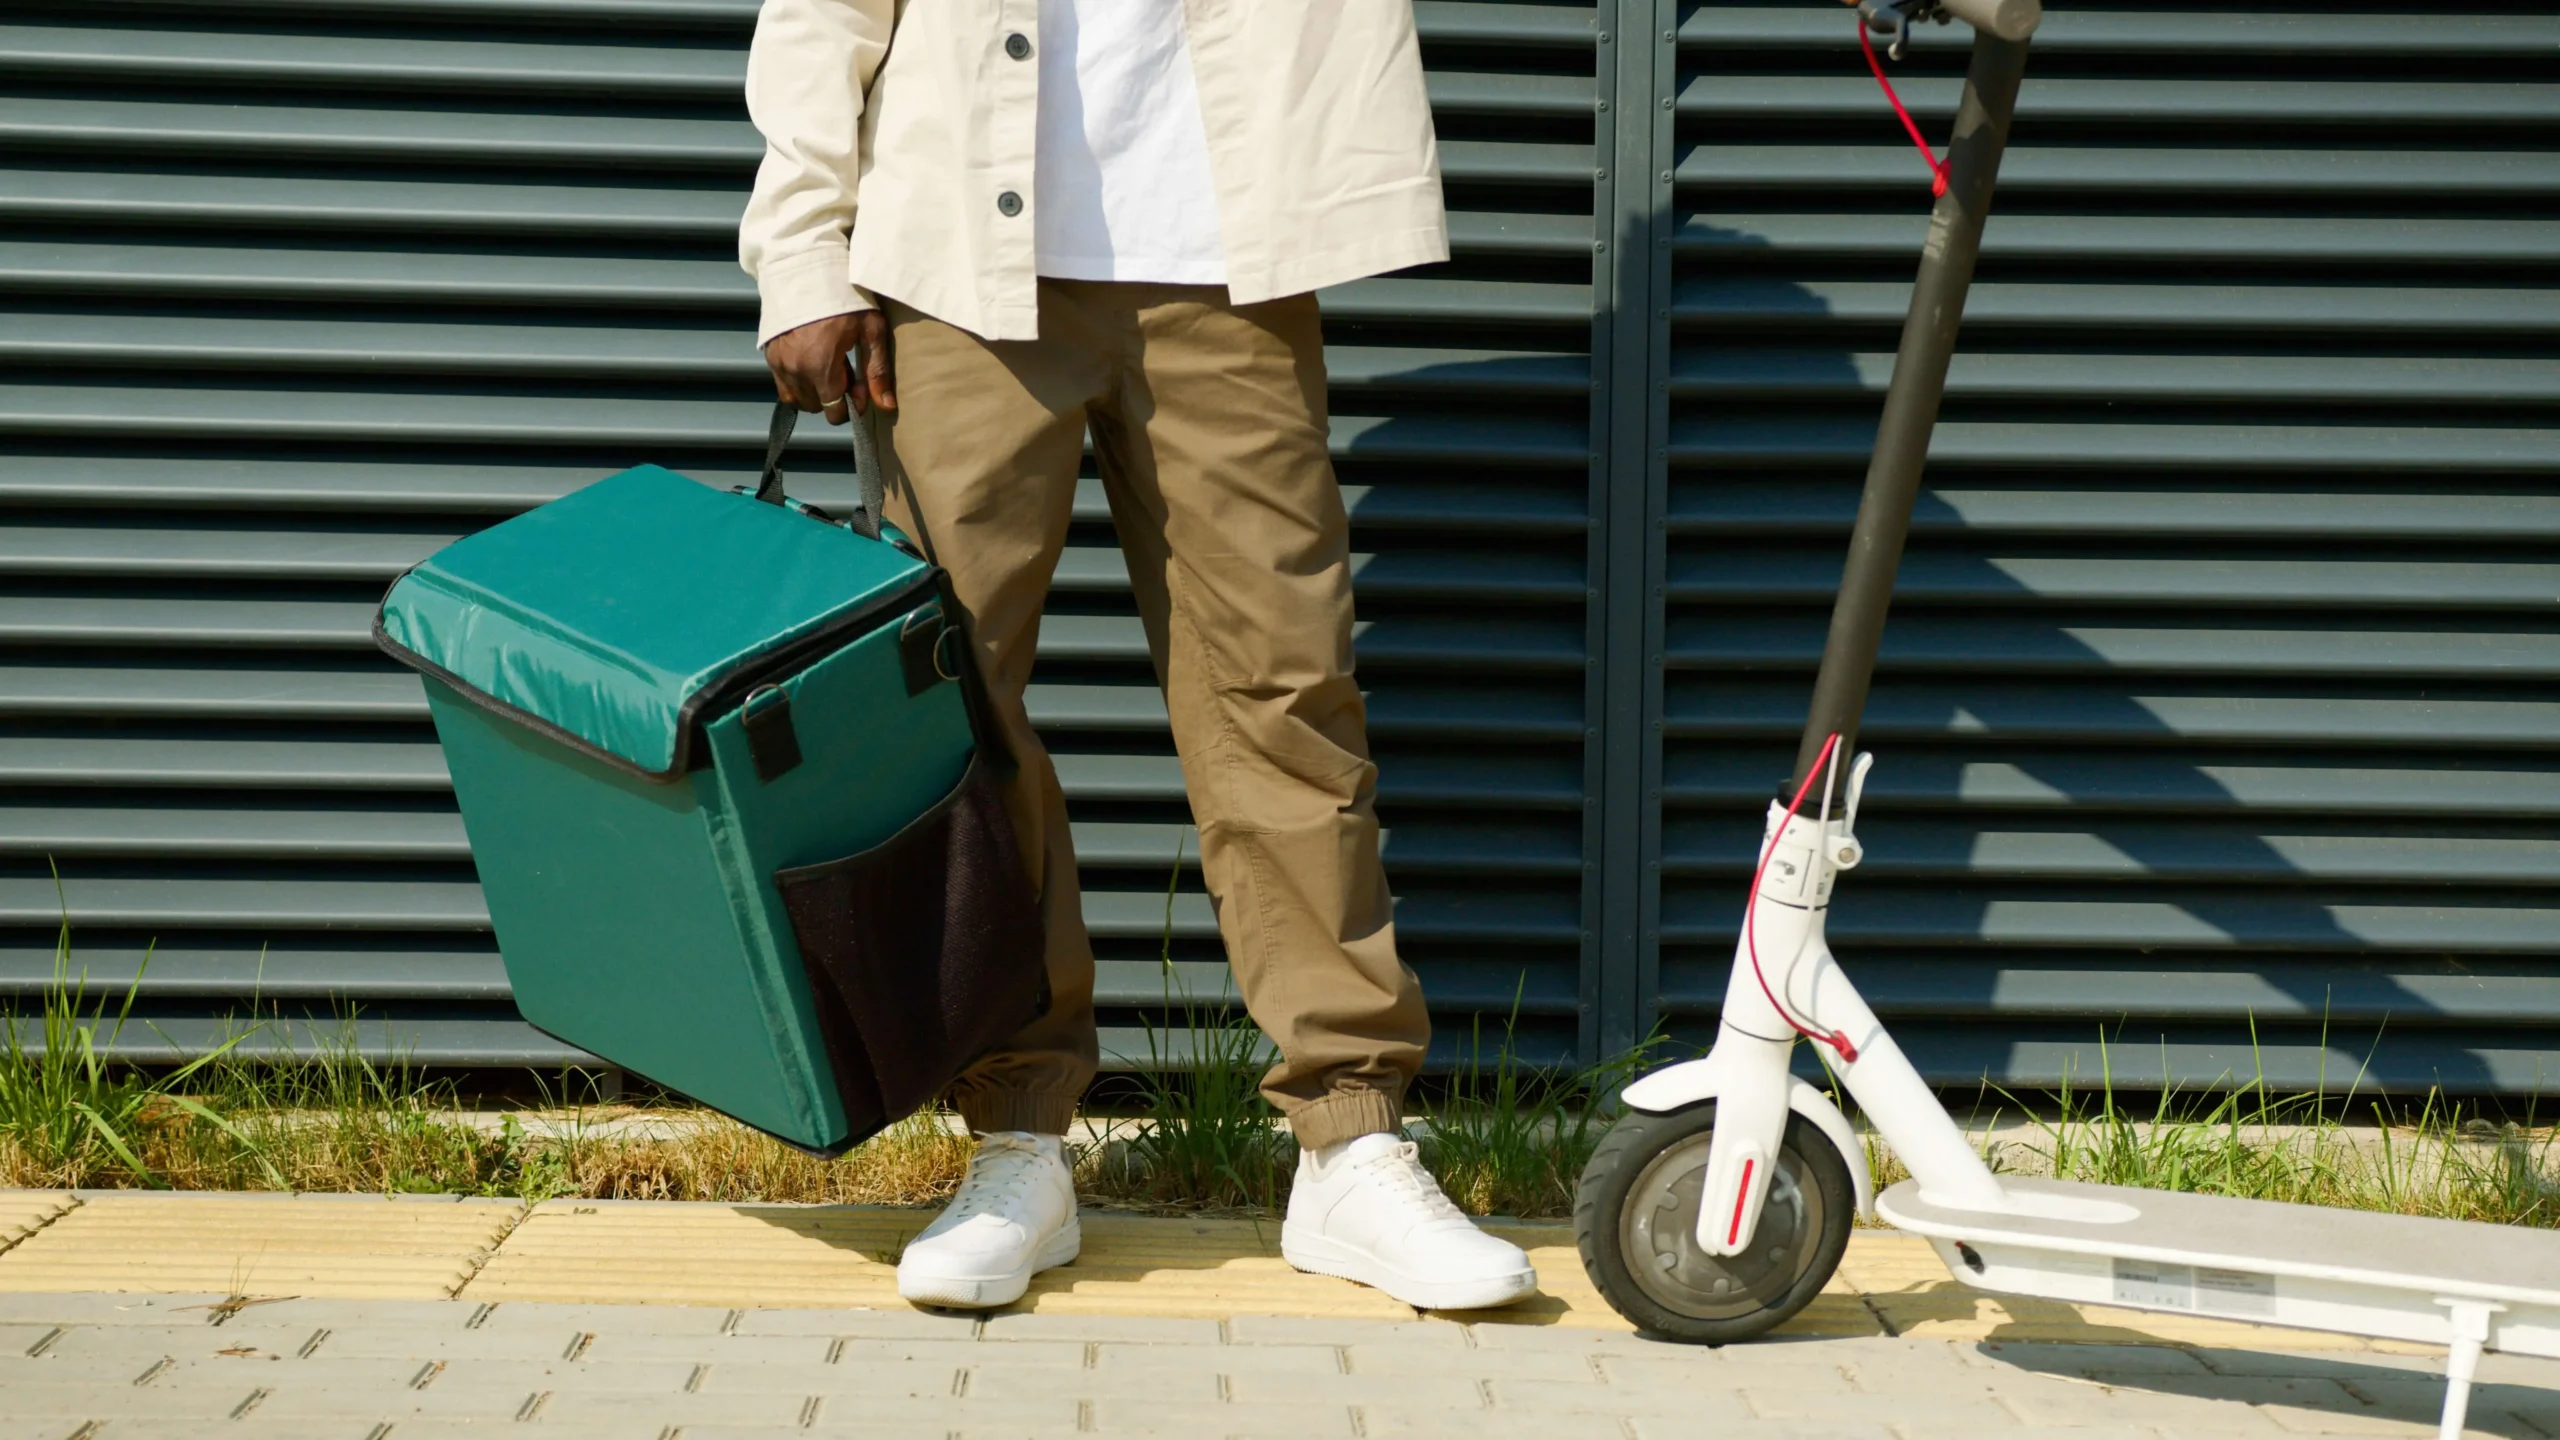 a white custom pro scooter alongside a man wearing white shirt ,brown pant and holding a green bag